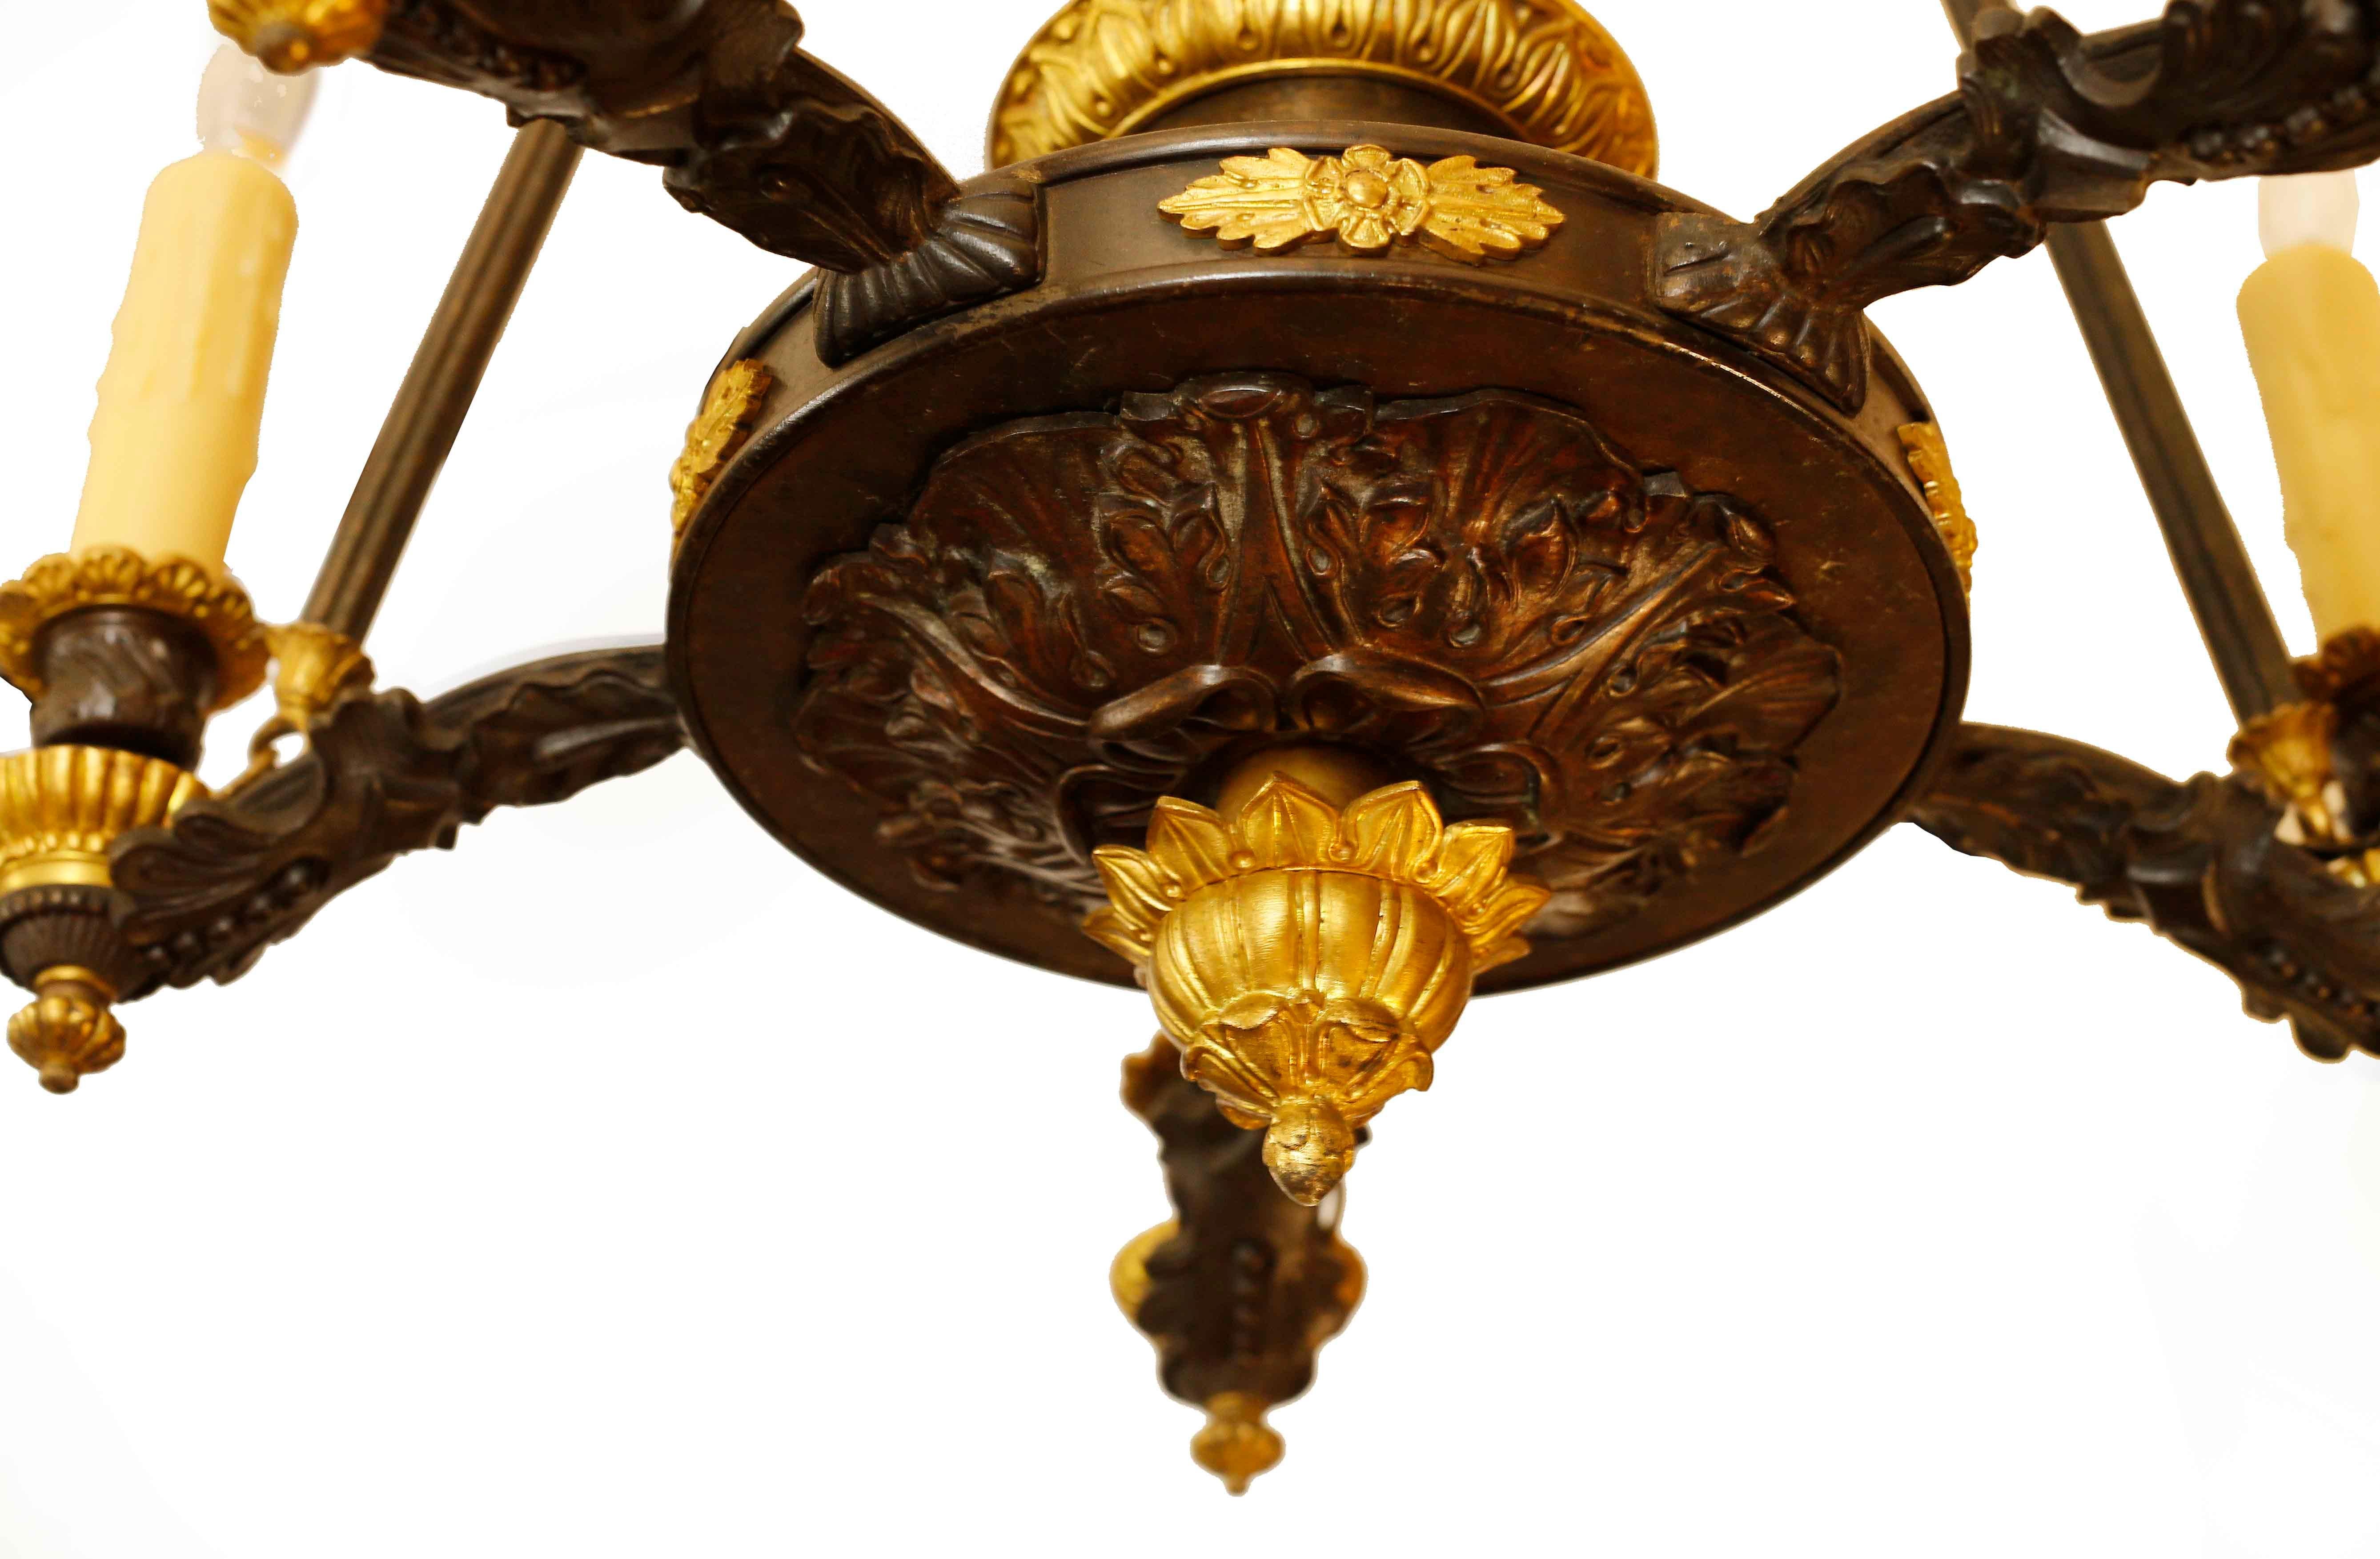 Mid-19th Century 19th Century French Charles X Ormolu and Bronze Chandelier with Five Lights For Sale